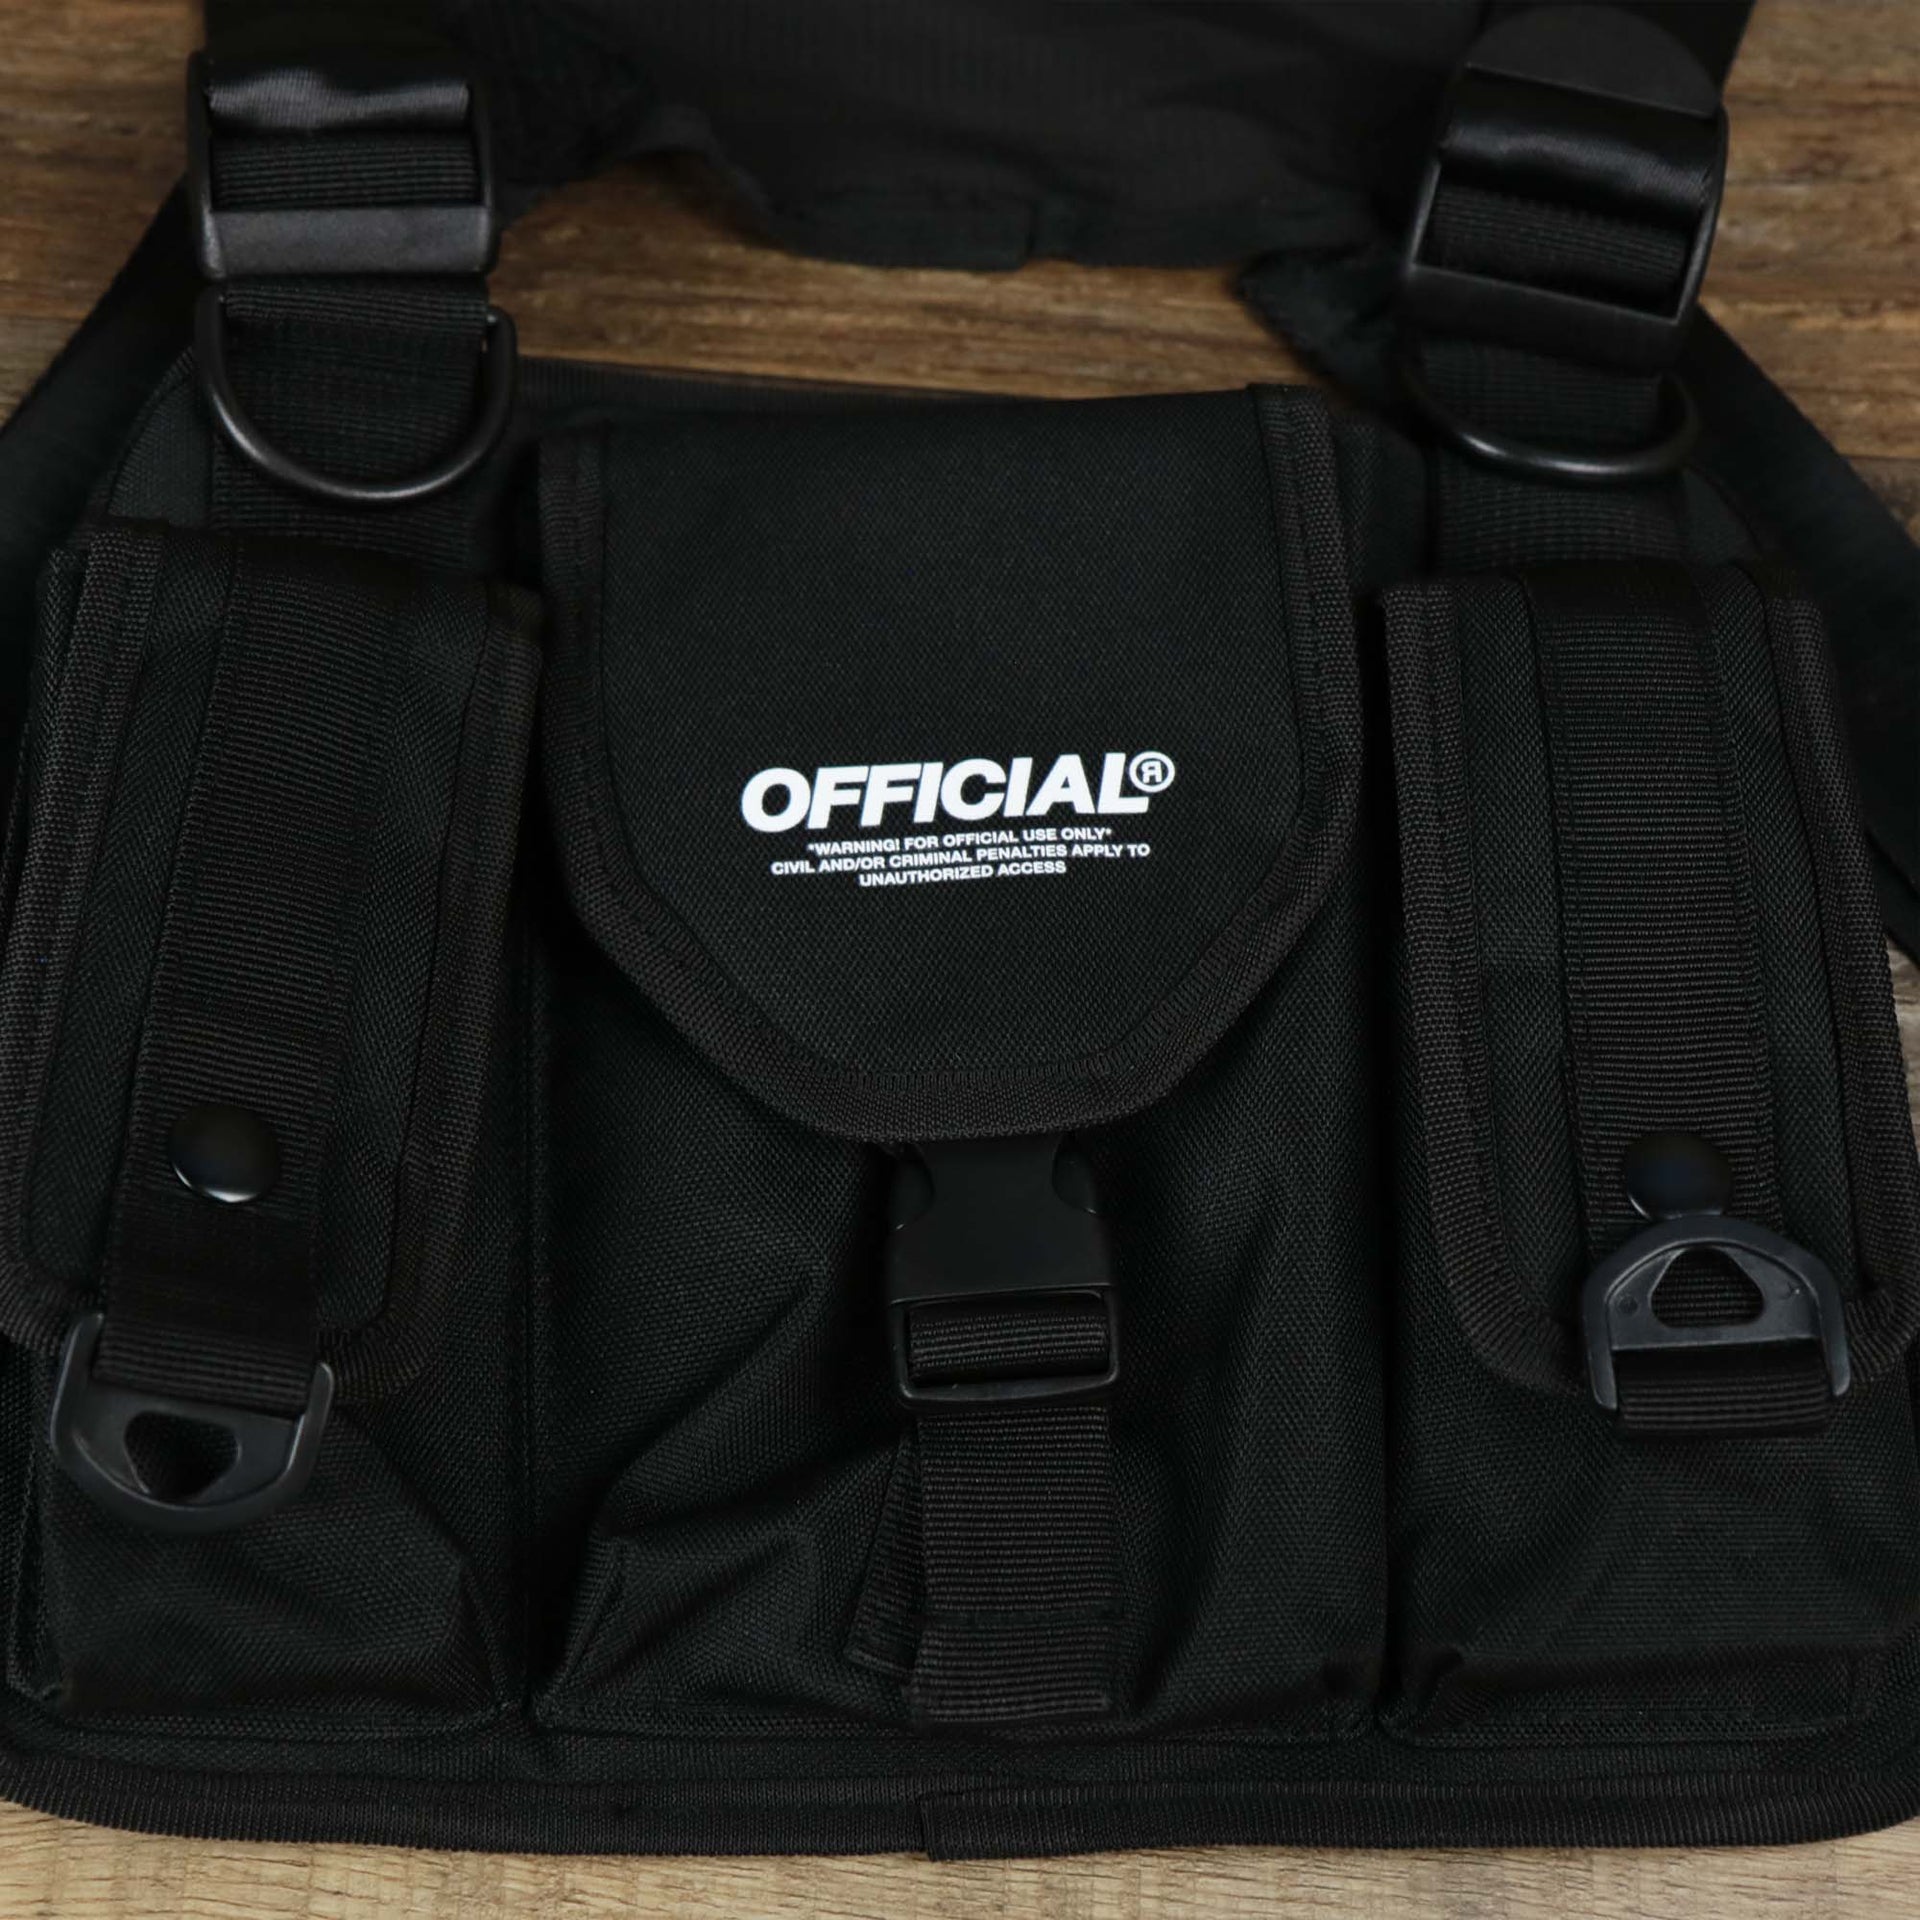 The front of the Streetwear Tactics Chest Bag Utility Vest | Official Black